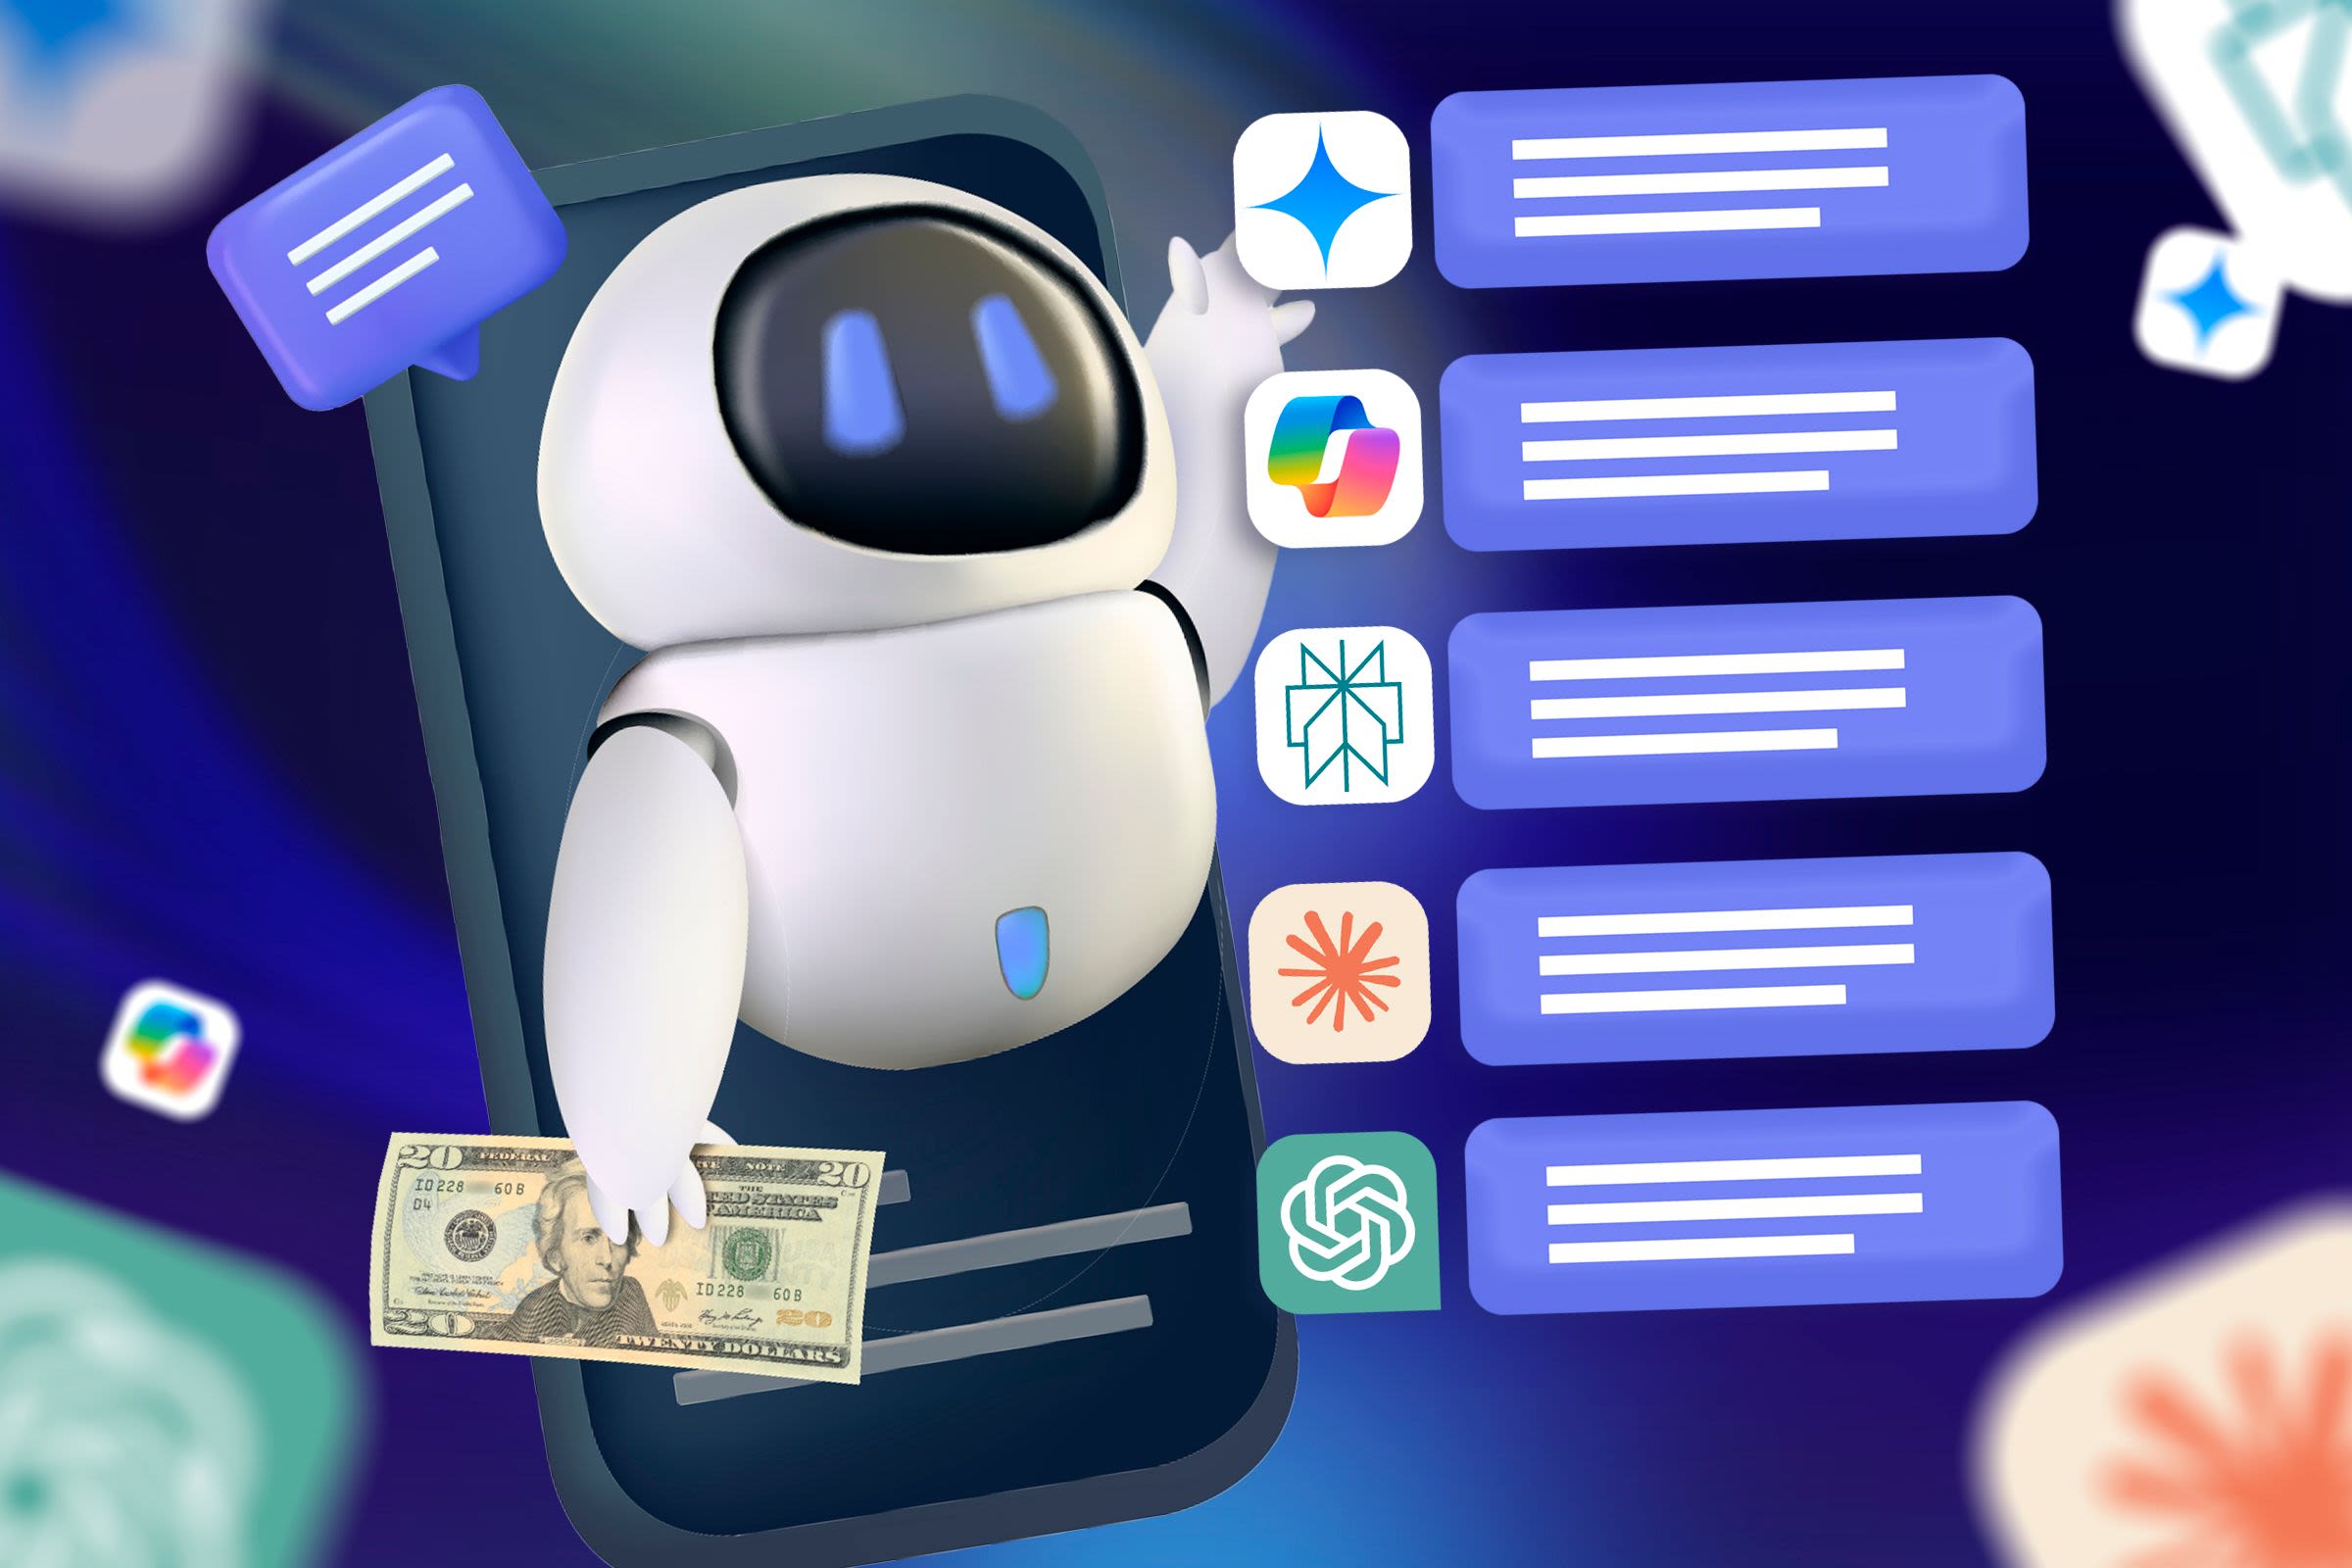 Which Chatbot Subscription Gets You the Most for Your $20?